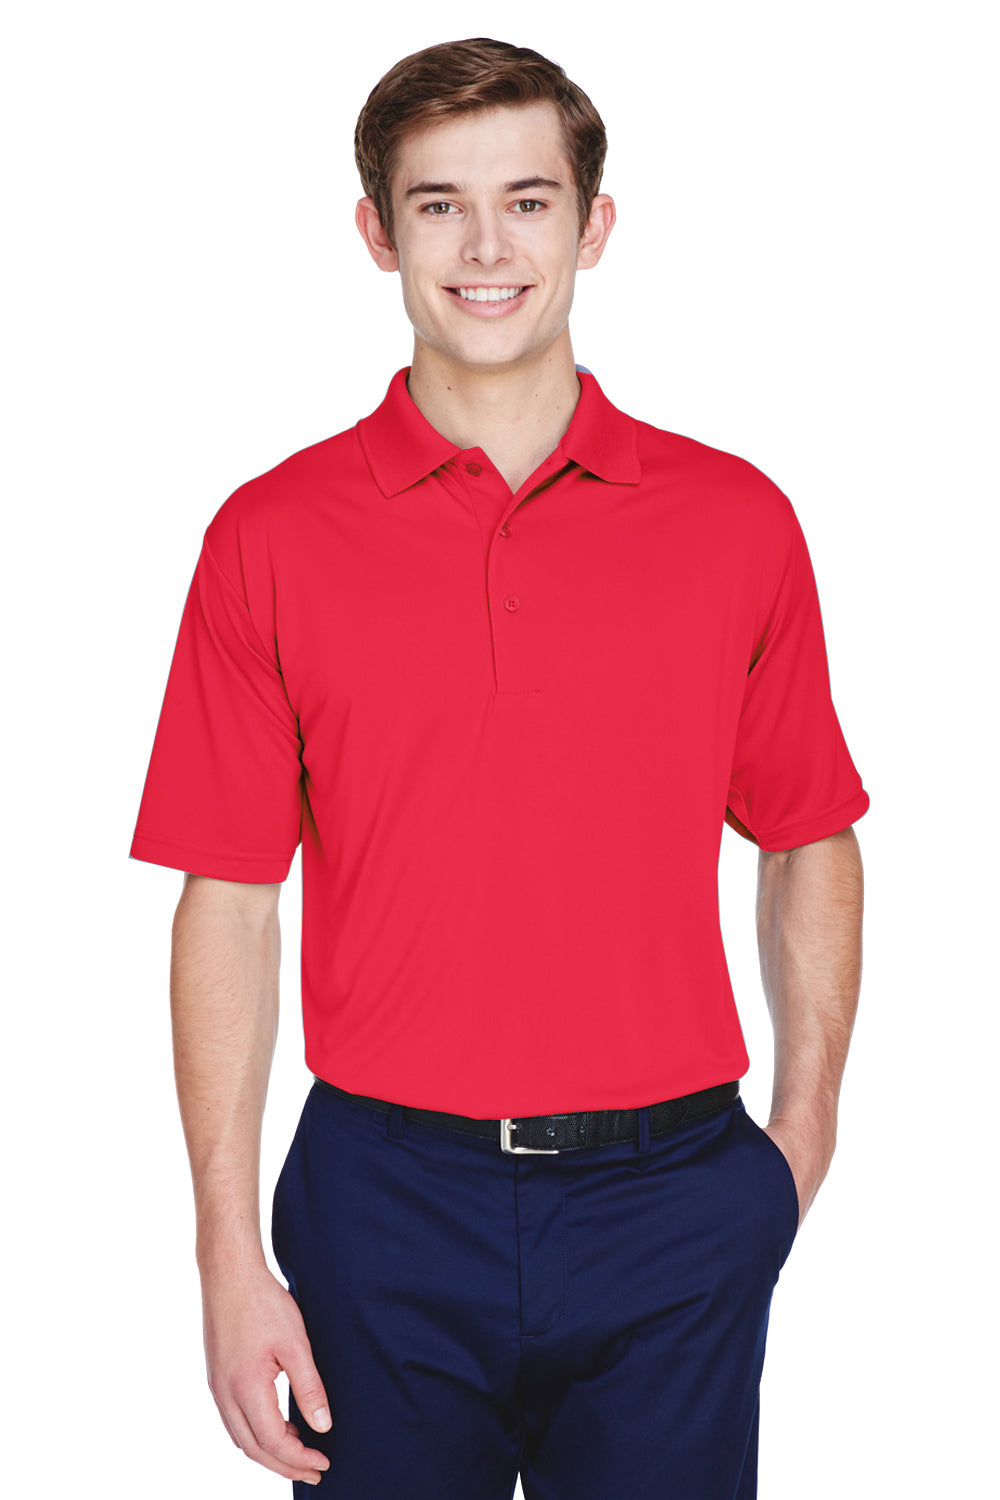 UltraClub 8610 Mens Cool & Dry 8 Star Elite Performance Moisture Wicking Short Sleeve Polo Shirt Red Front